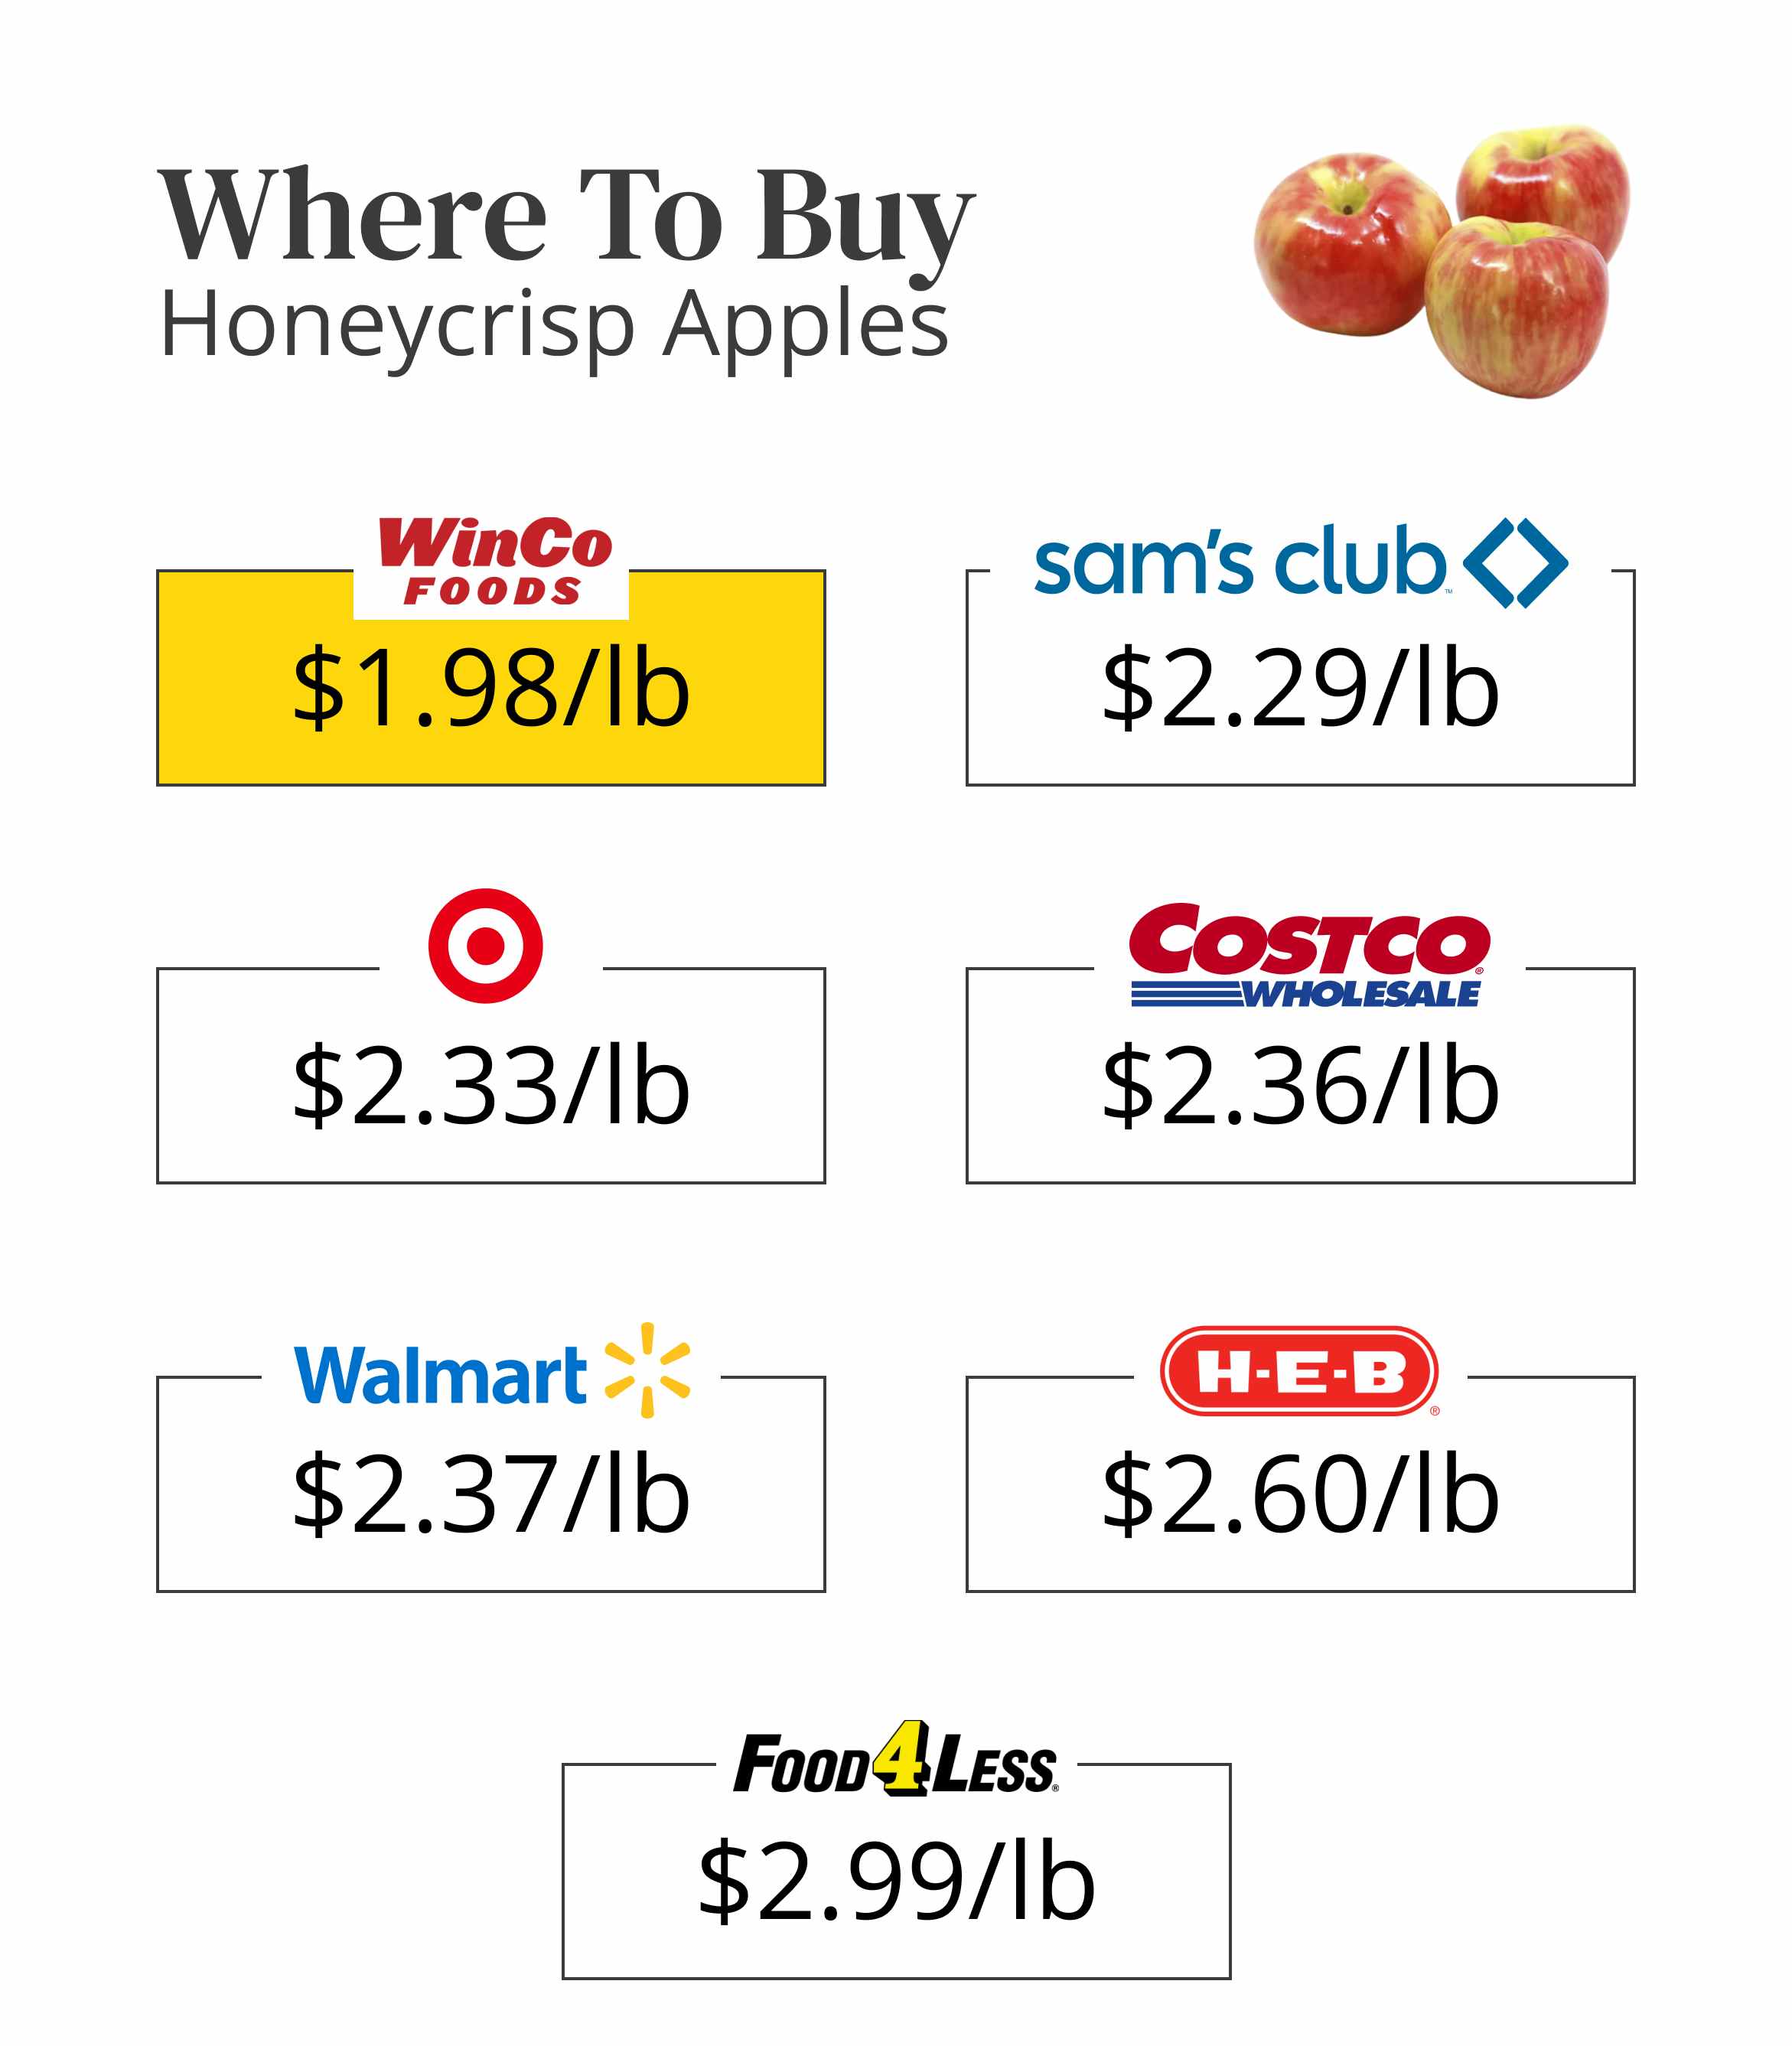 Value-priced grocery offers